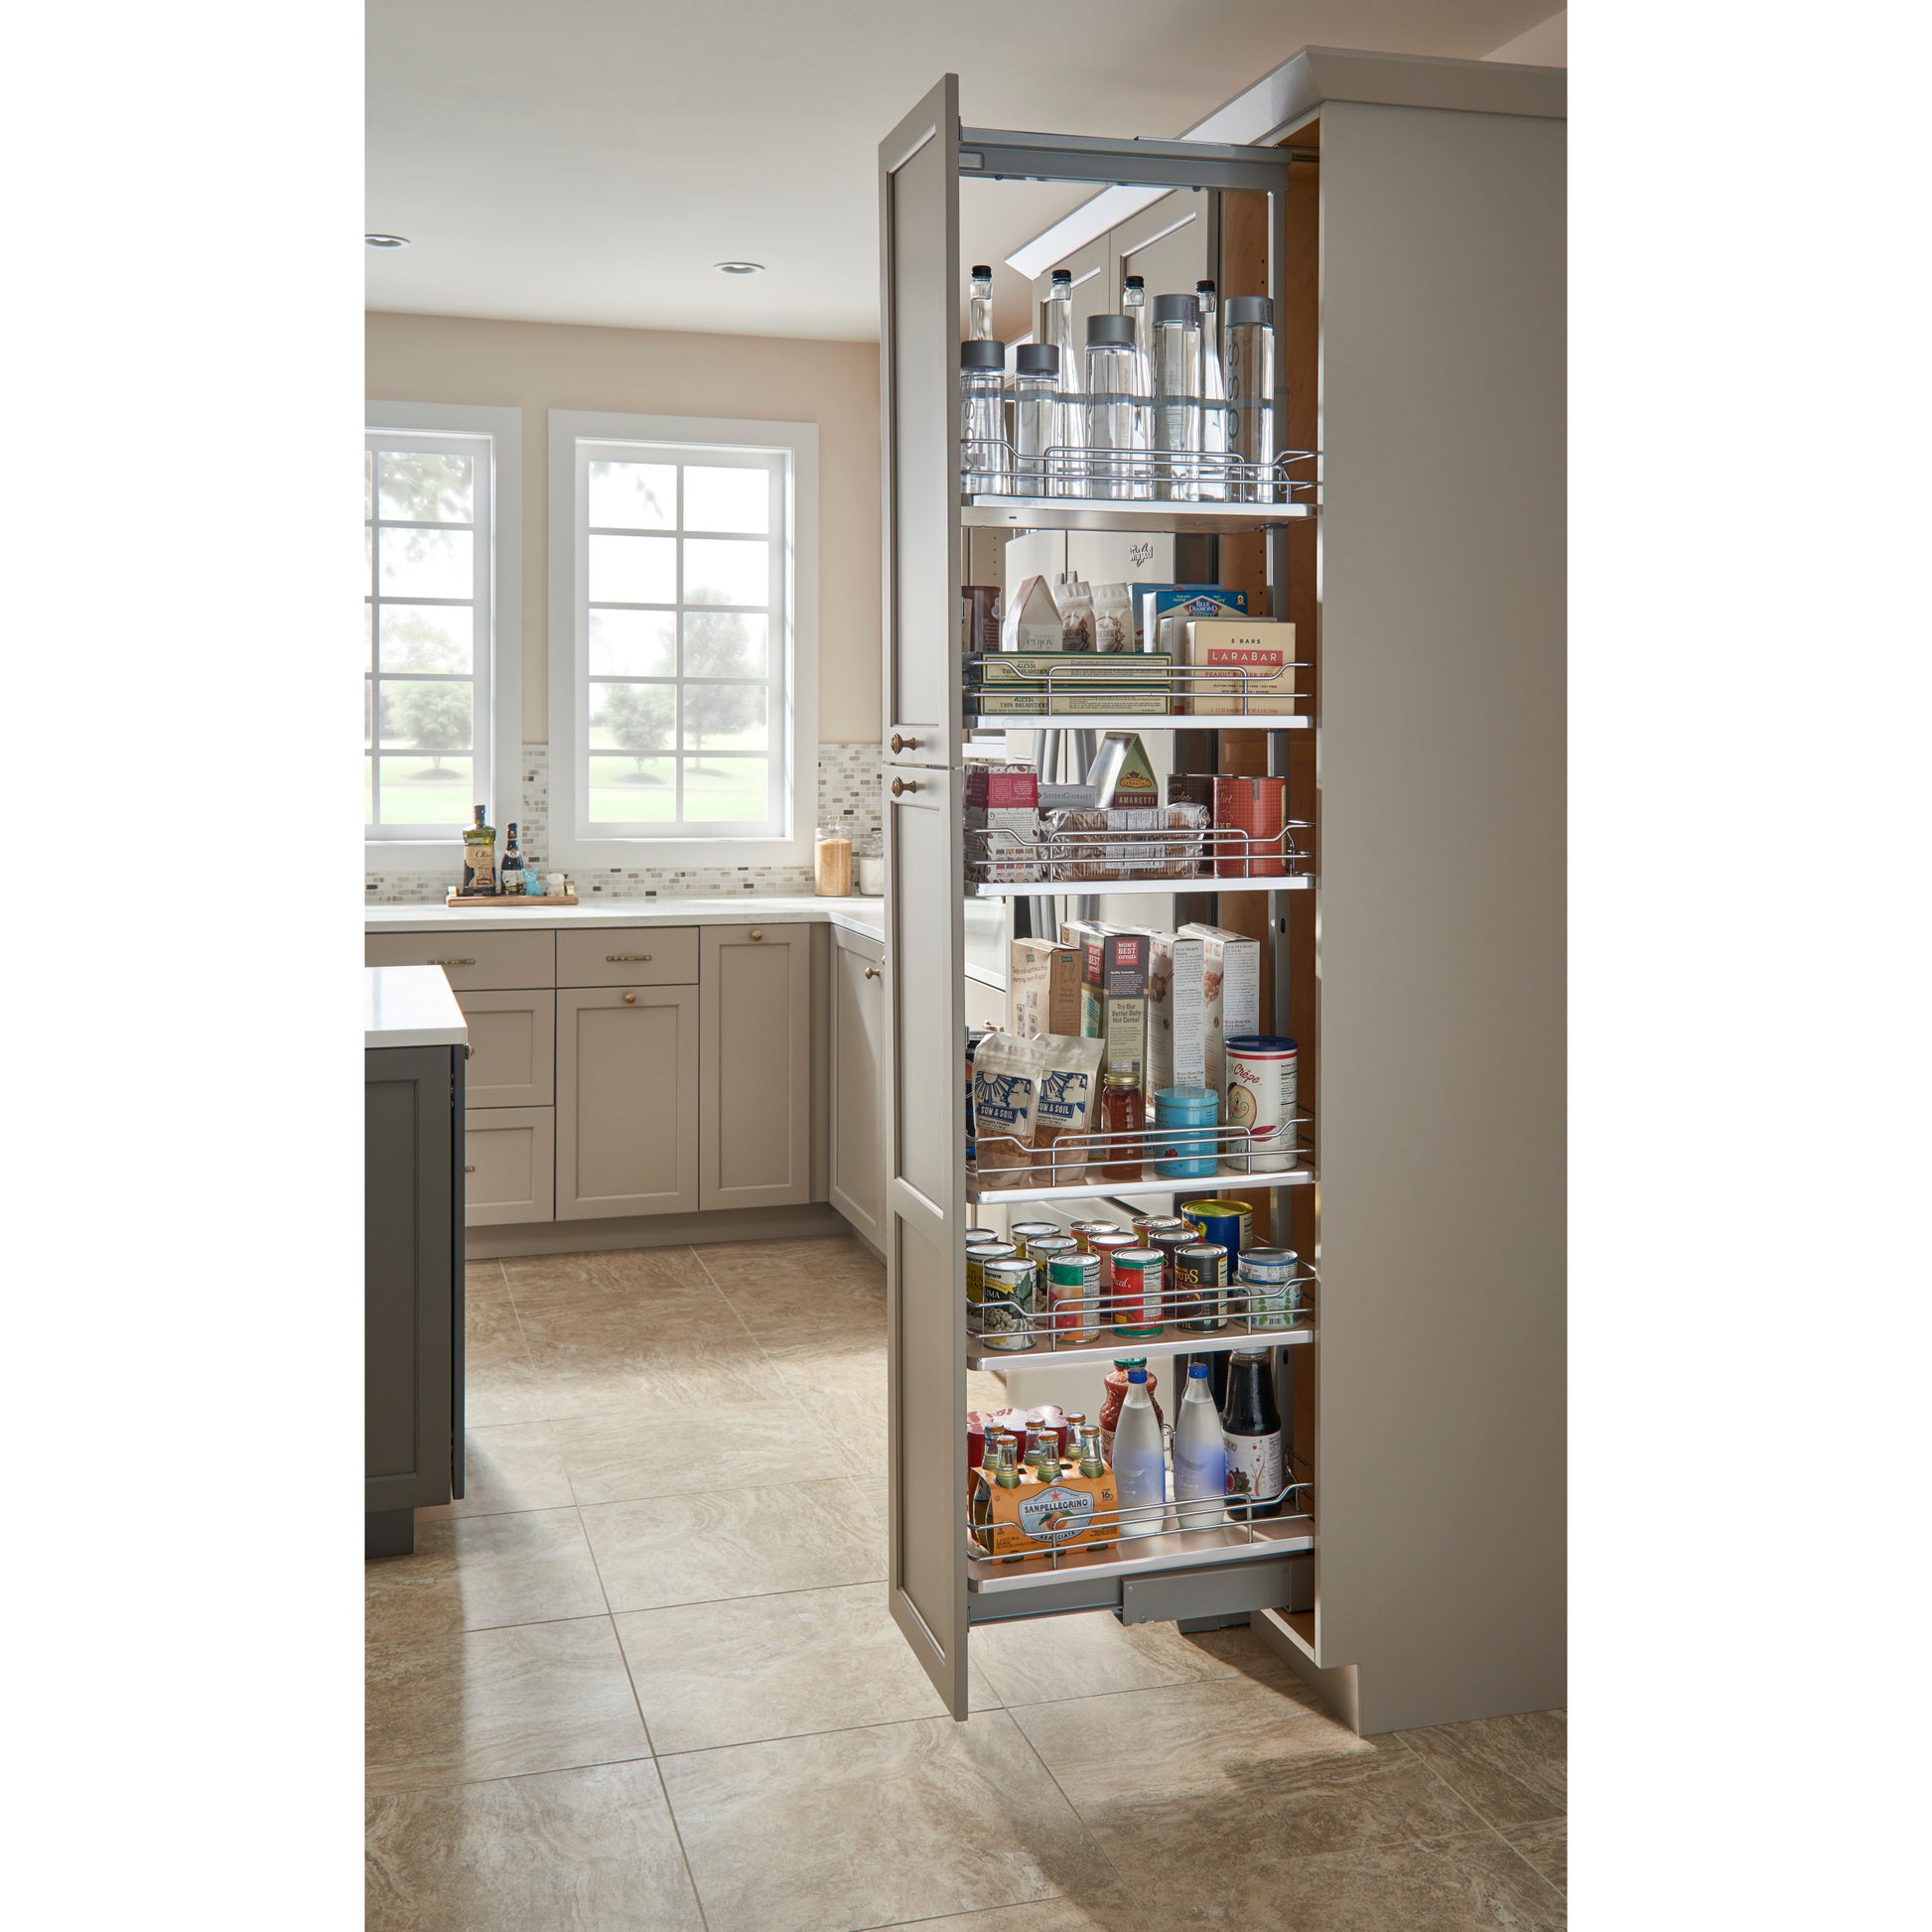 Rev-A-Shelf - Adjustable Solid Surface Pantry System for Tall Pantry Cabinets - 5350-16-MP